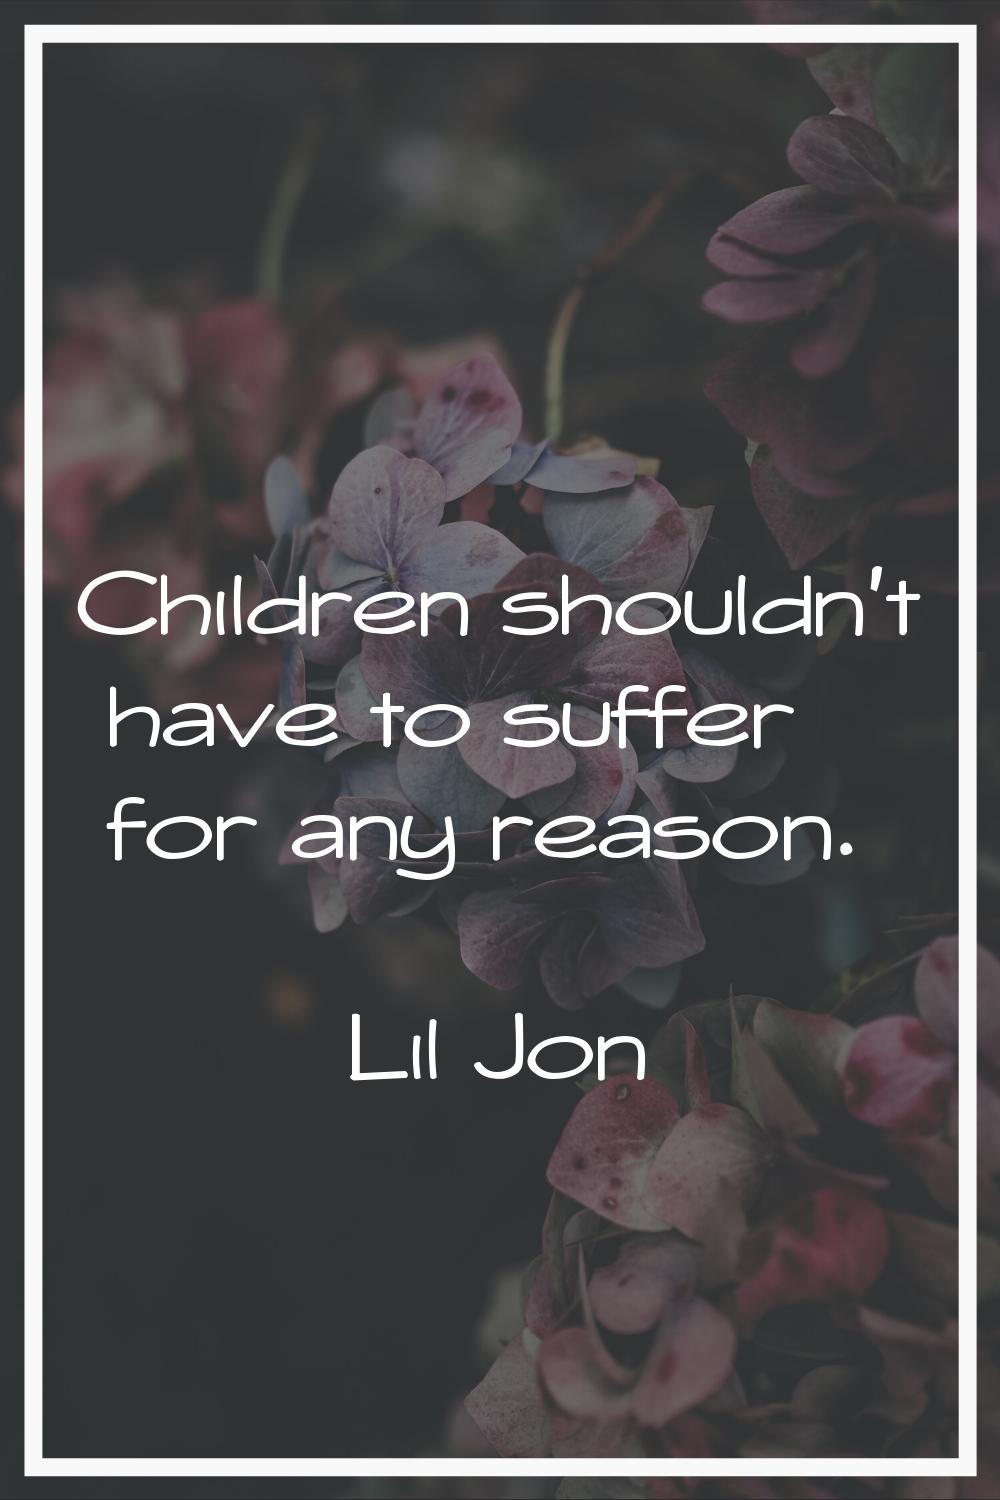 Children shouldn't have to suffer for any reason.